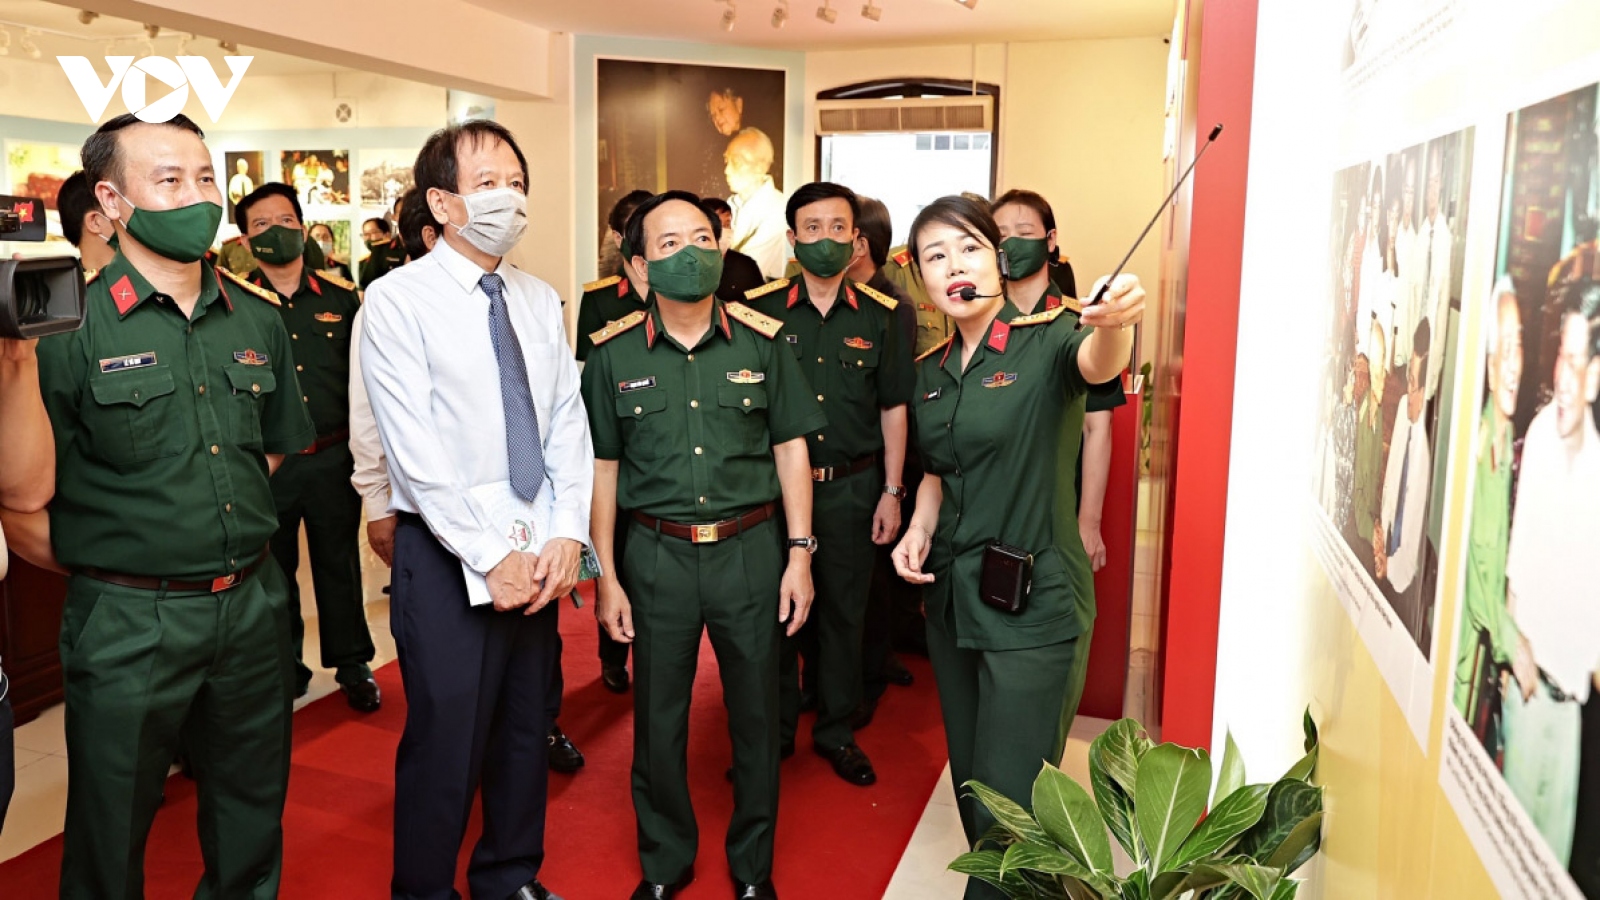 Exhibition commemorates 110th birth anniversary of General Vo Nguyen Giap